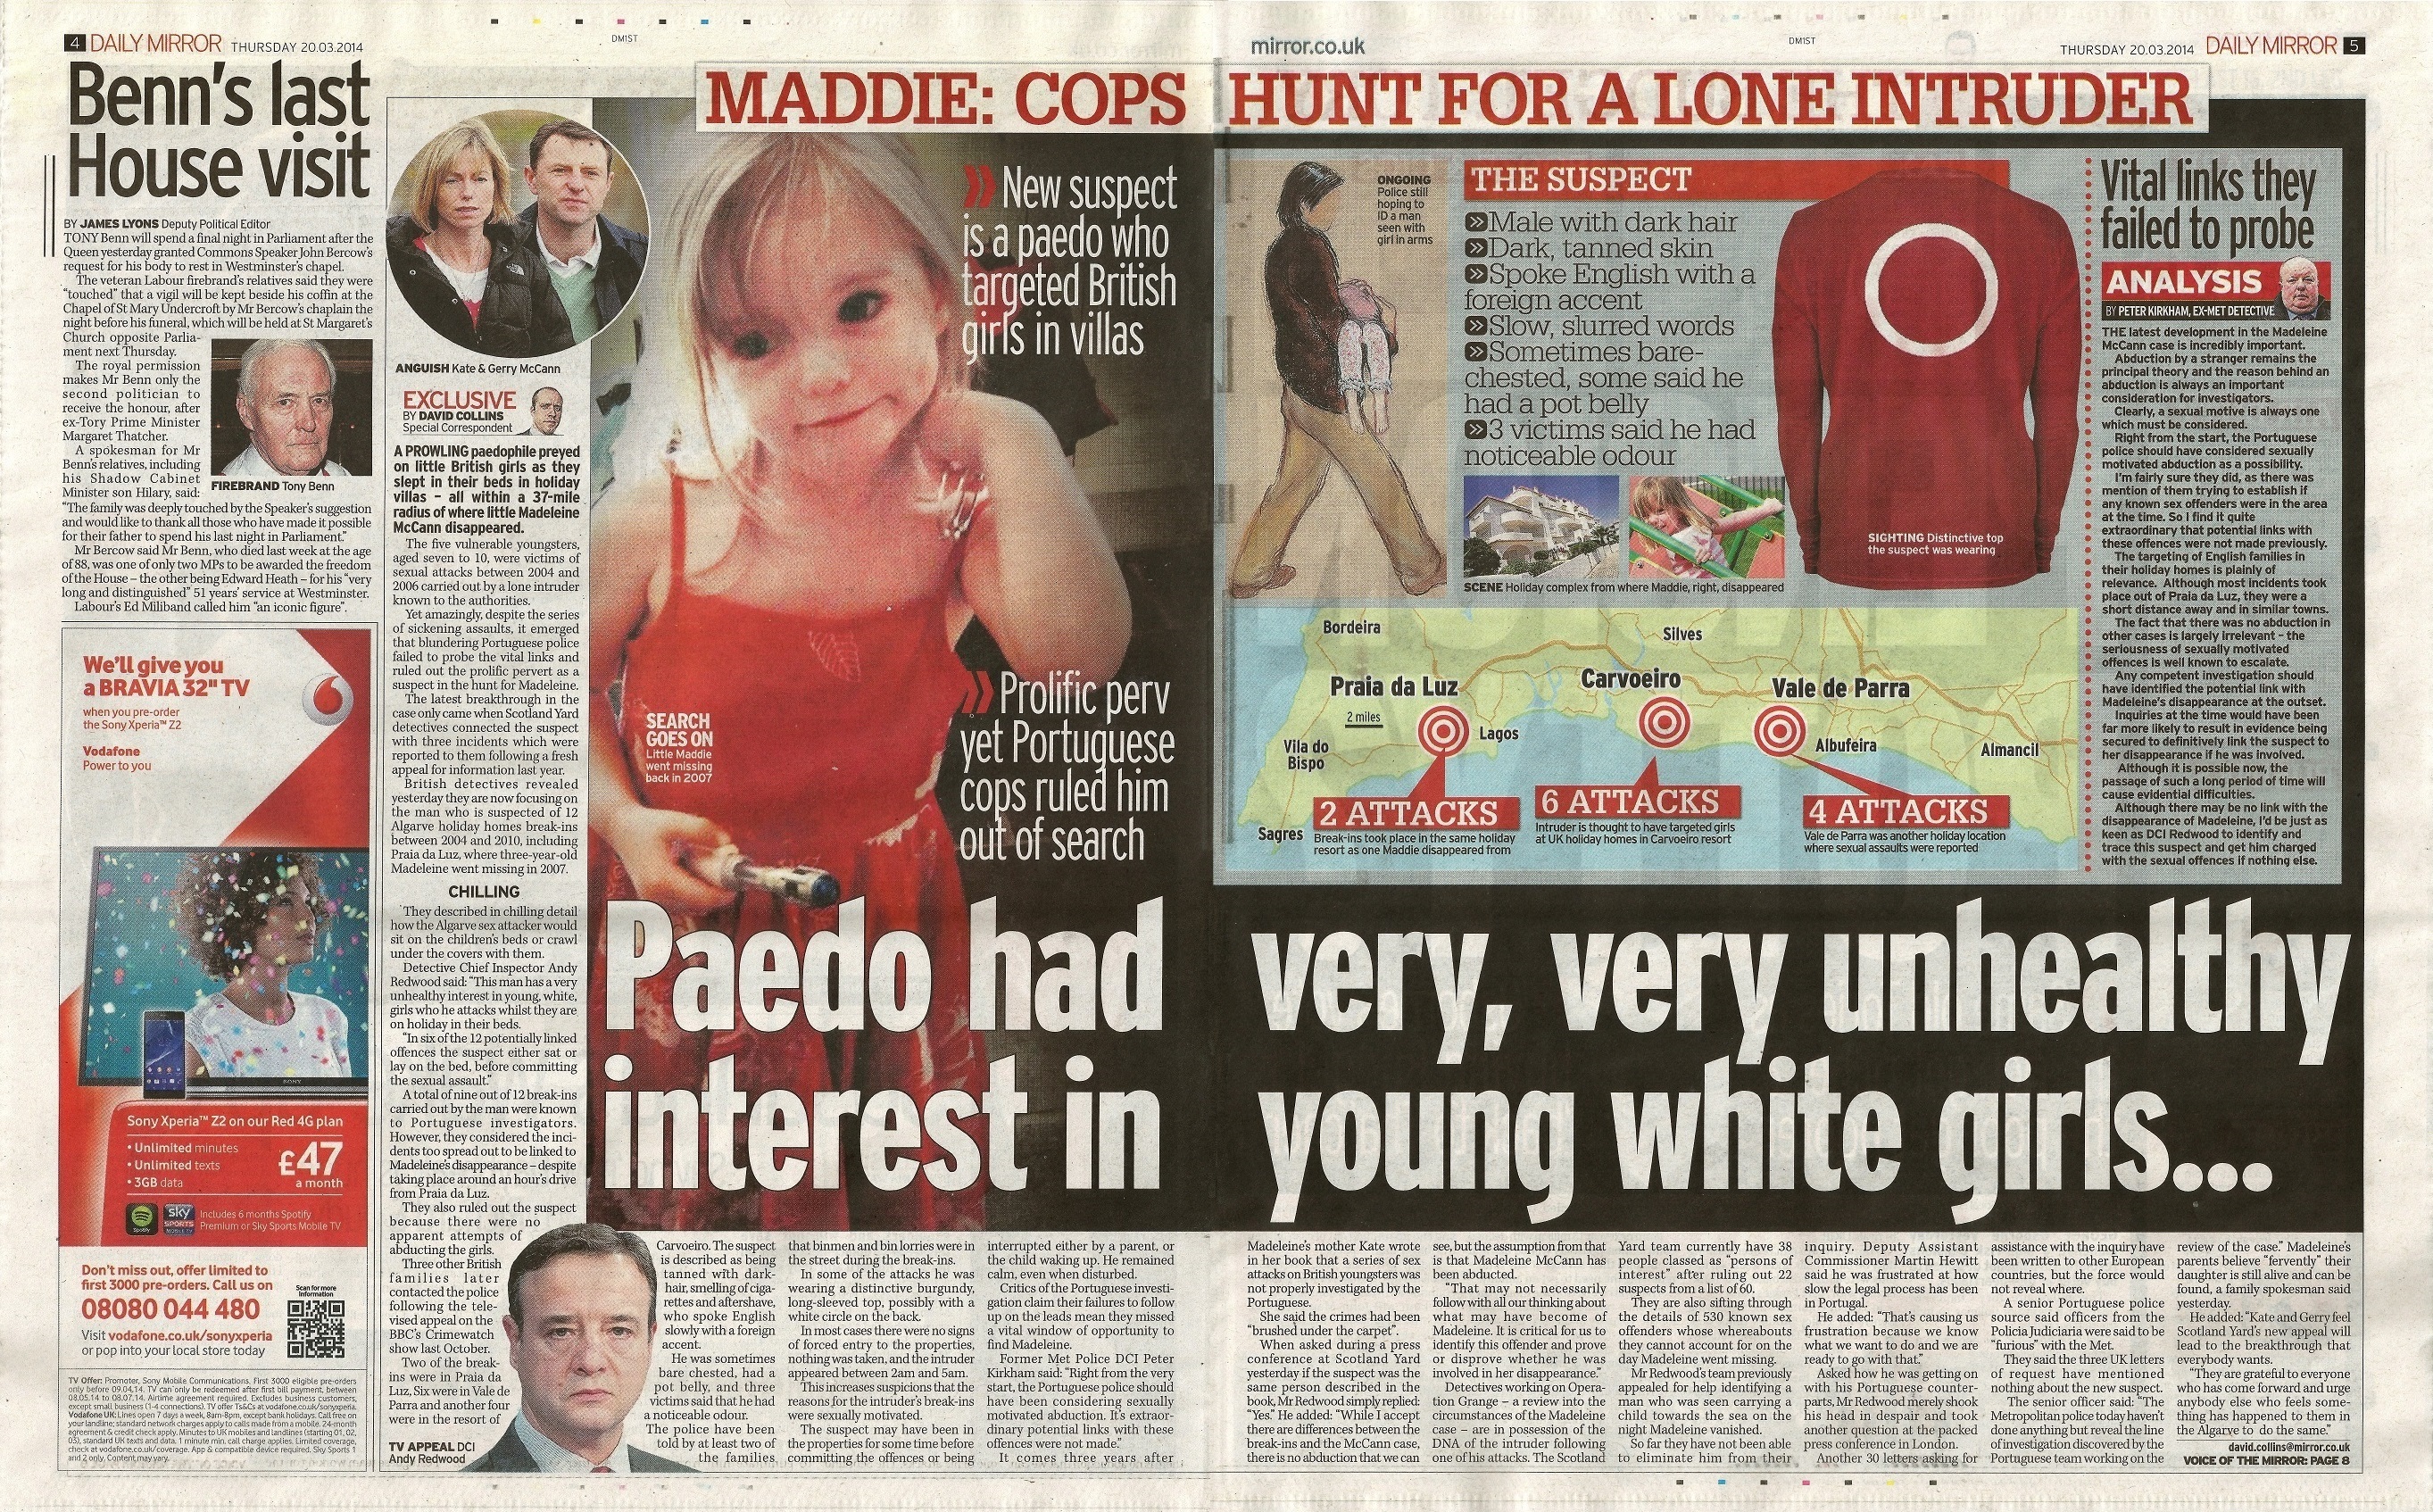 Daily Mirror, paper edition: 'Paedo had very, very unhealthy interest in young white girls...', 20 March 2014